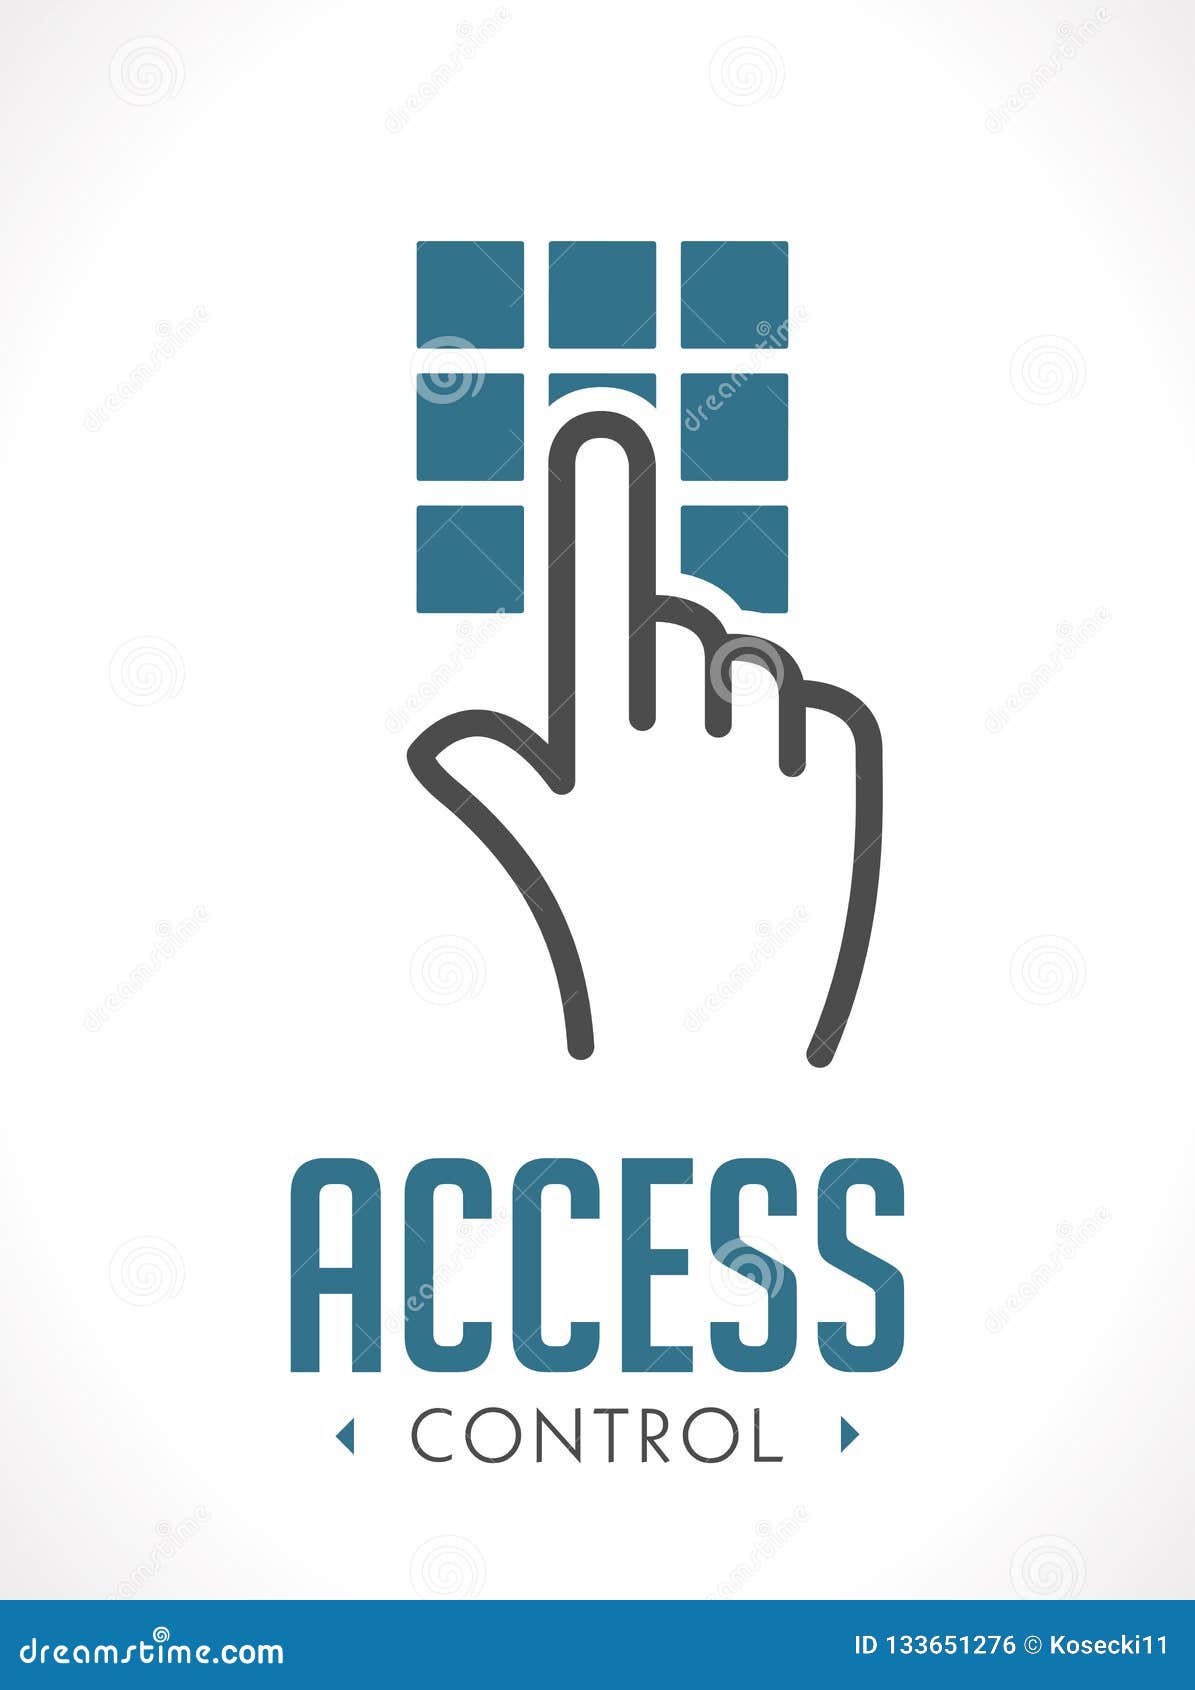 access control technology - hand as key concept - icon sign